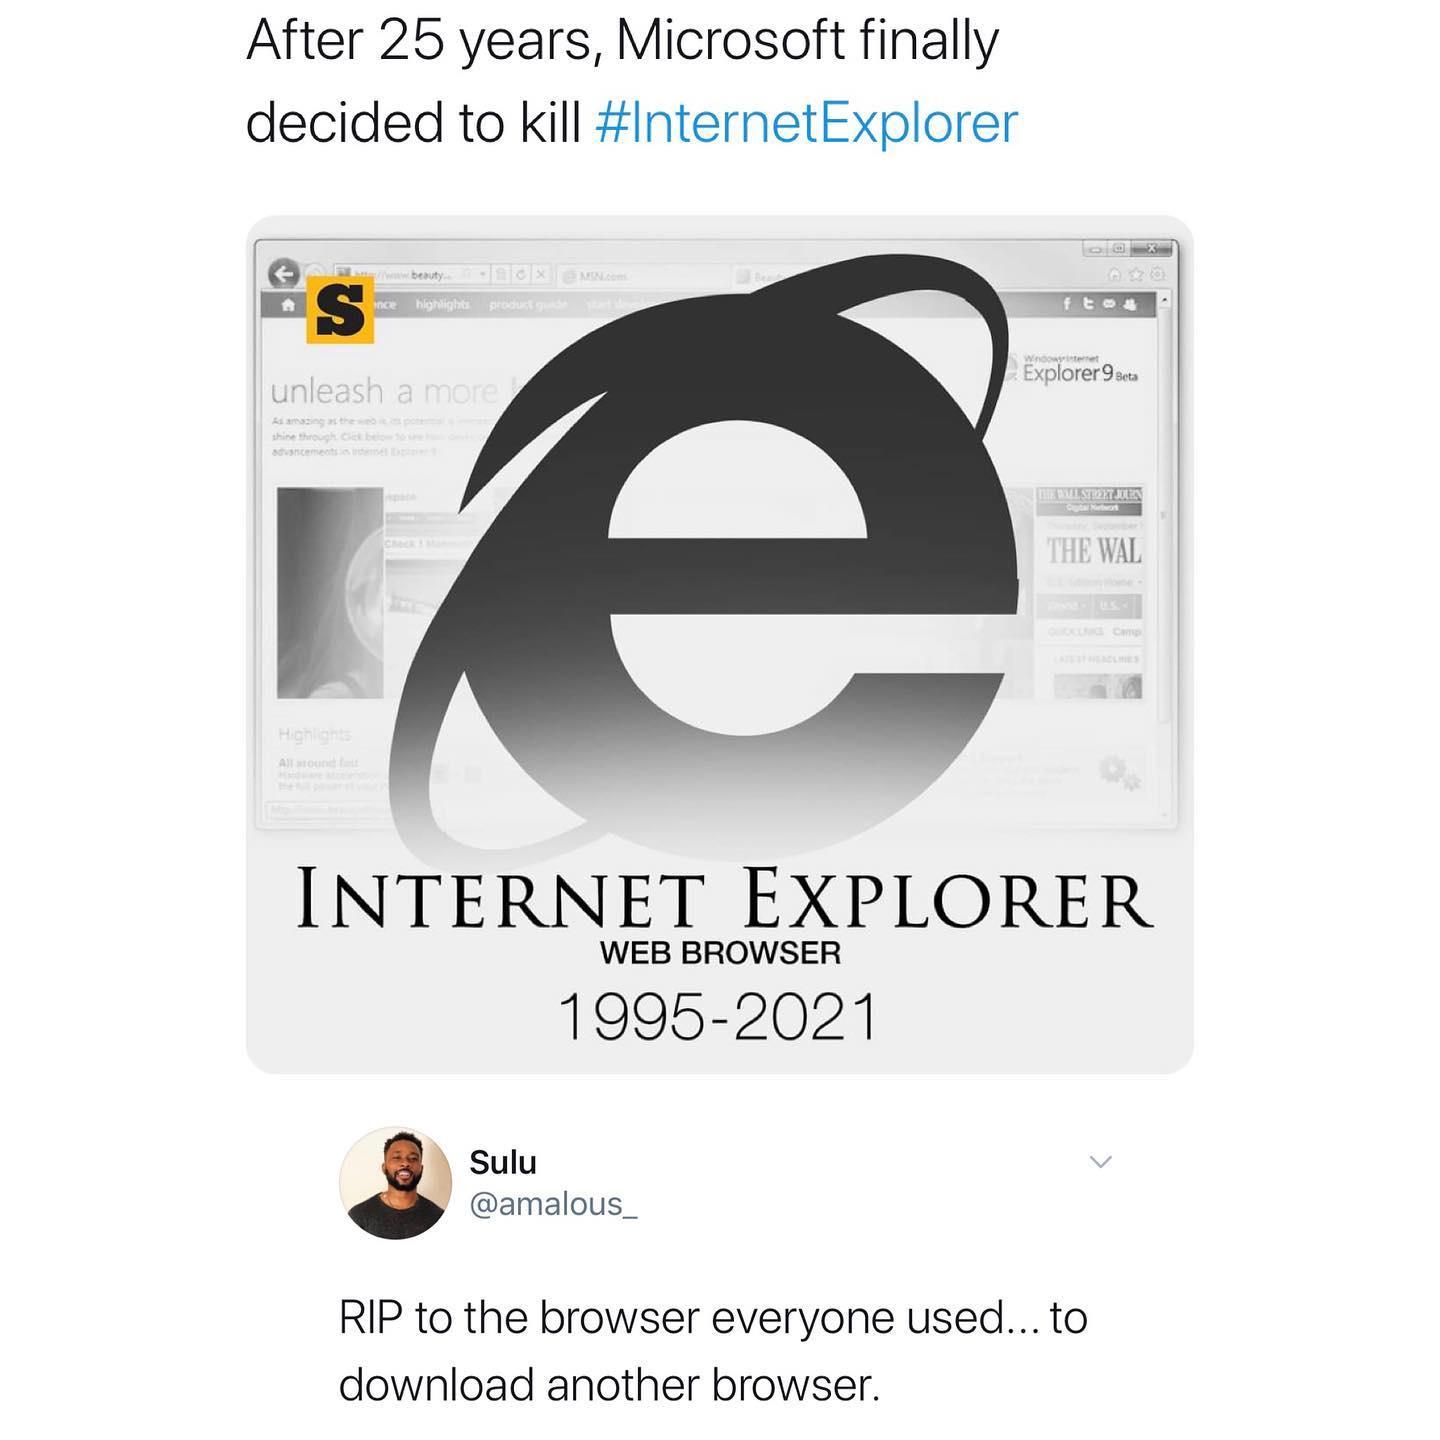 internet explorer - After 25 years, Microsoft finally decided to kill ce highlight ft Weet Explorer 9 seta unleash a more cemet e Listet Julen The Wal High All Internet Explorer Web Browser 19952021 Sulu Rip to the browser everyone used... to download ano